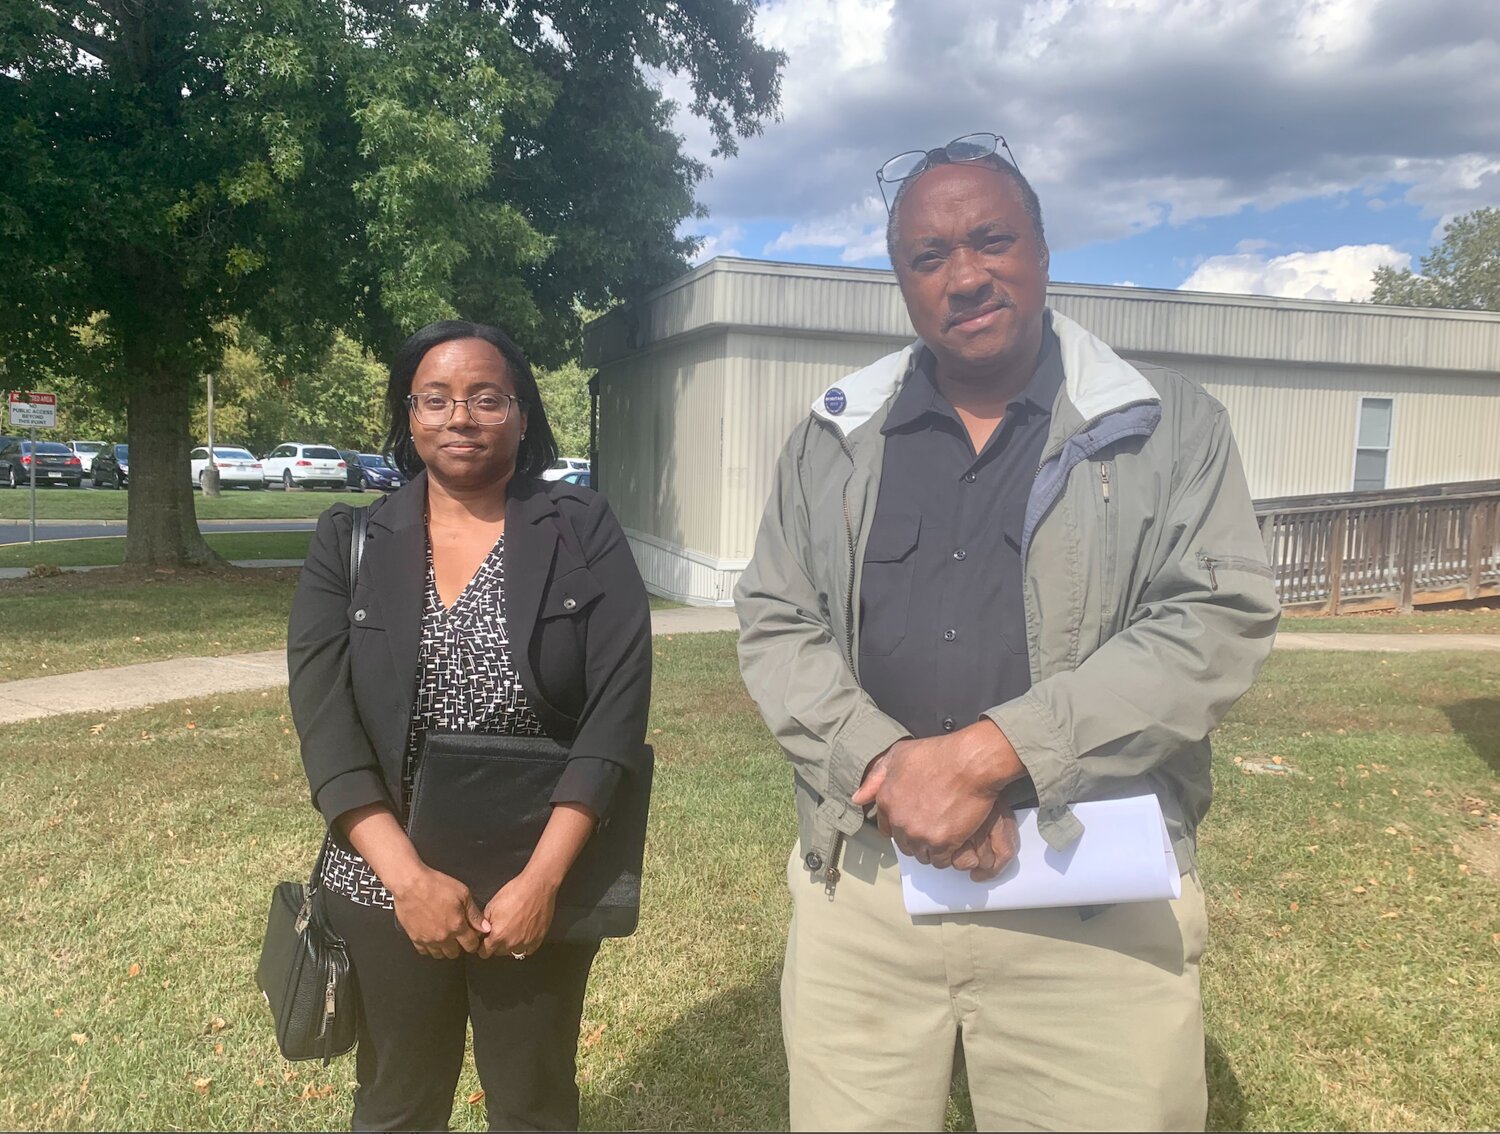 Geraline Thomas Freeman and Allen Freeman speak at a press conference demanding an apology from Supervisor Jeanine Lawson for allegedly being told to leave a town hall style meeting held at New Bristoe Village on Oct. 4.